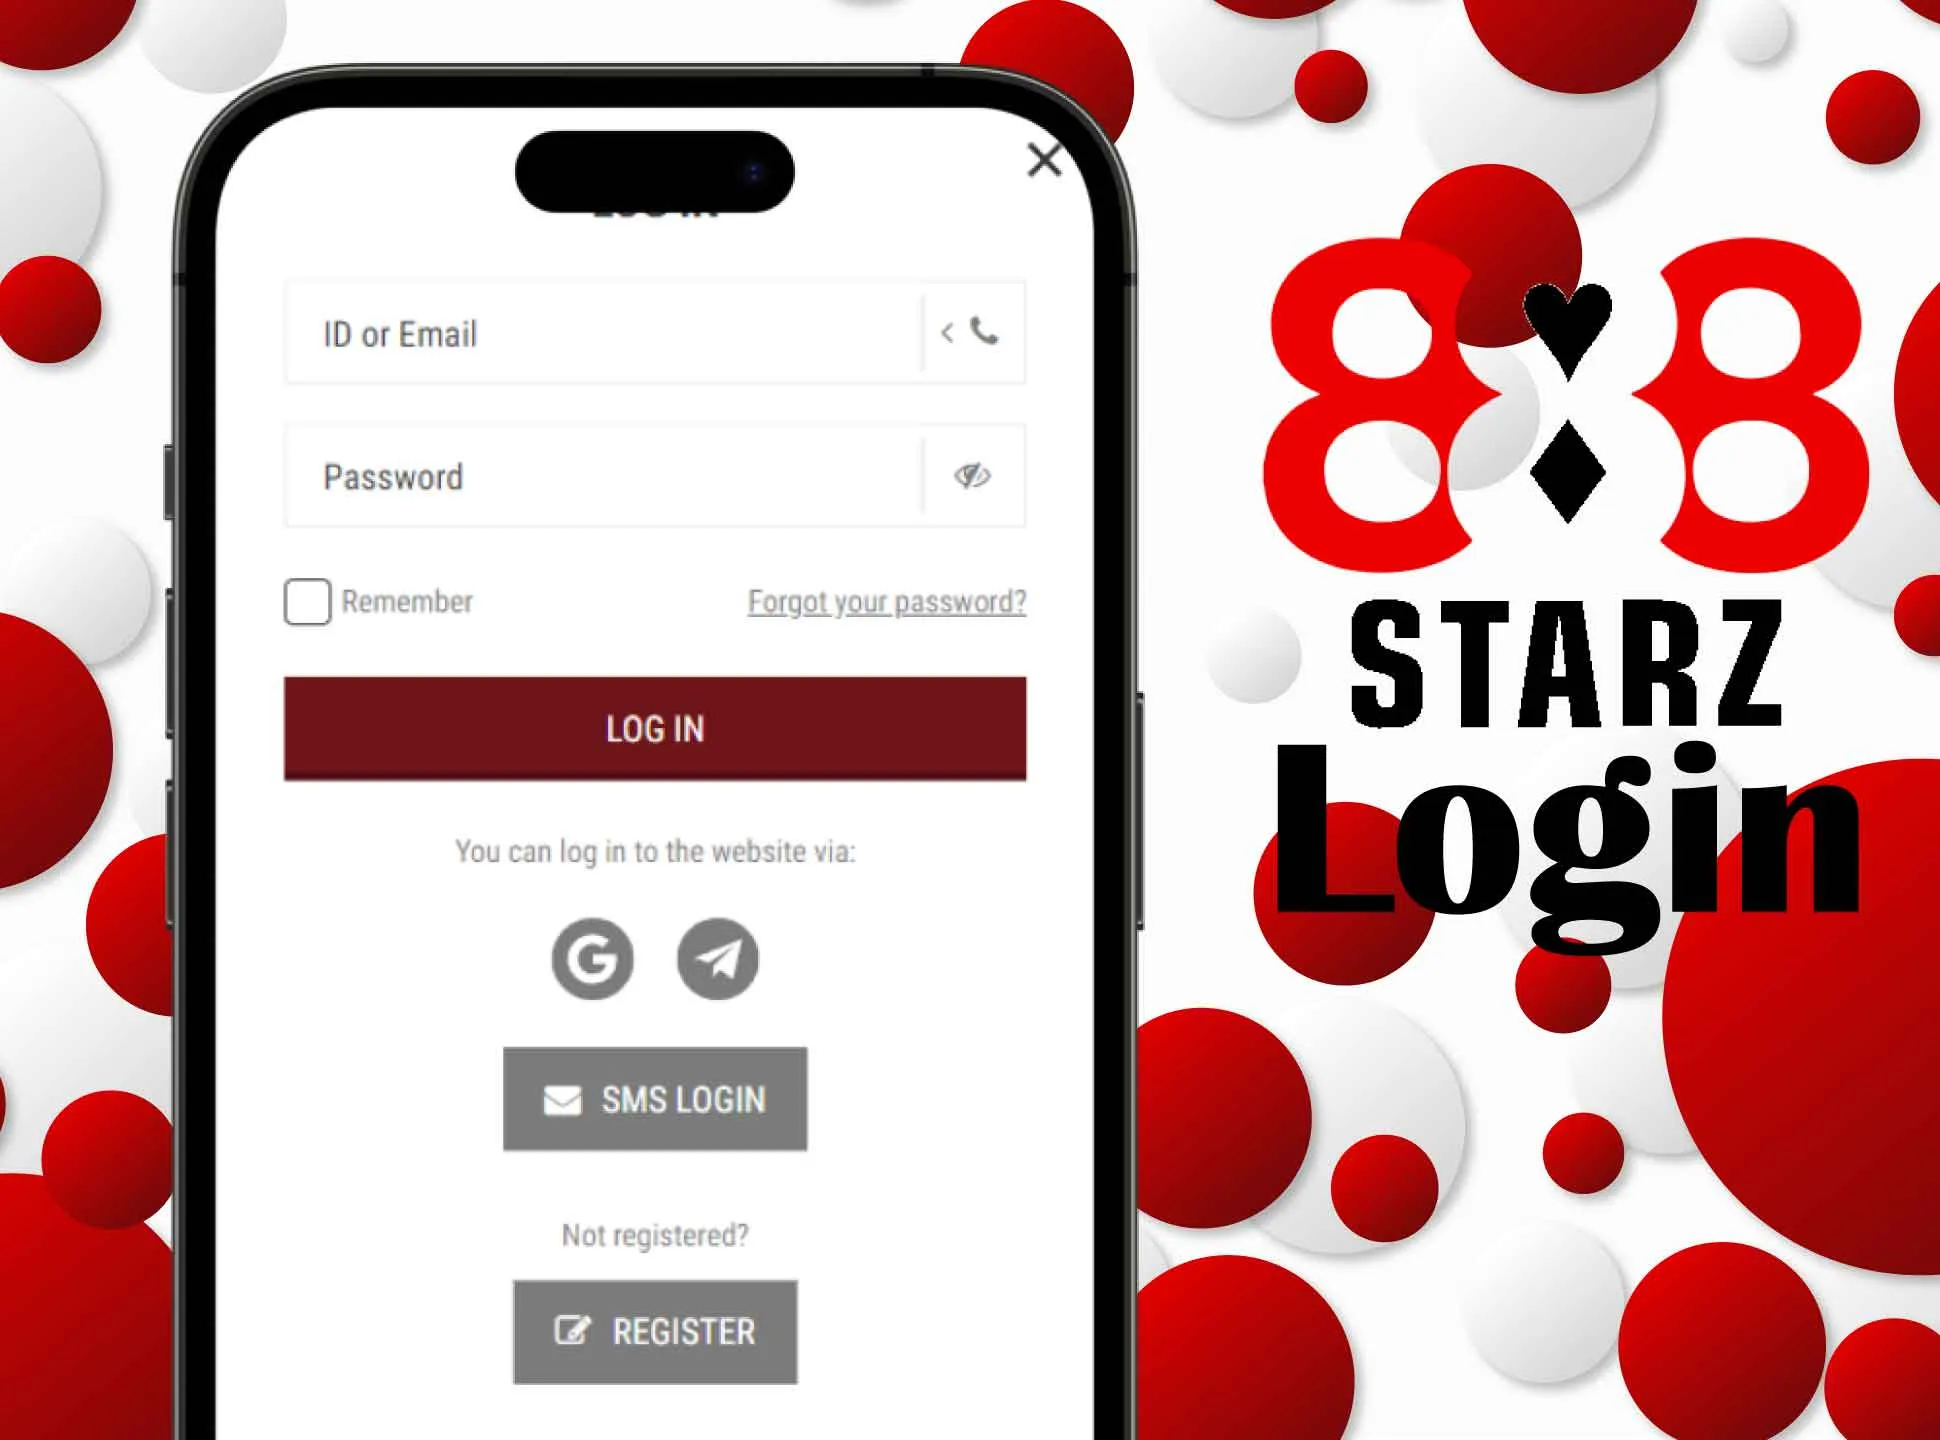 Log in to the 888starz account with your username and password.